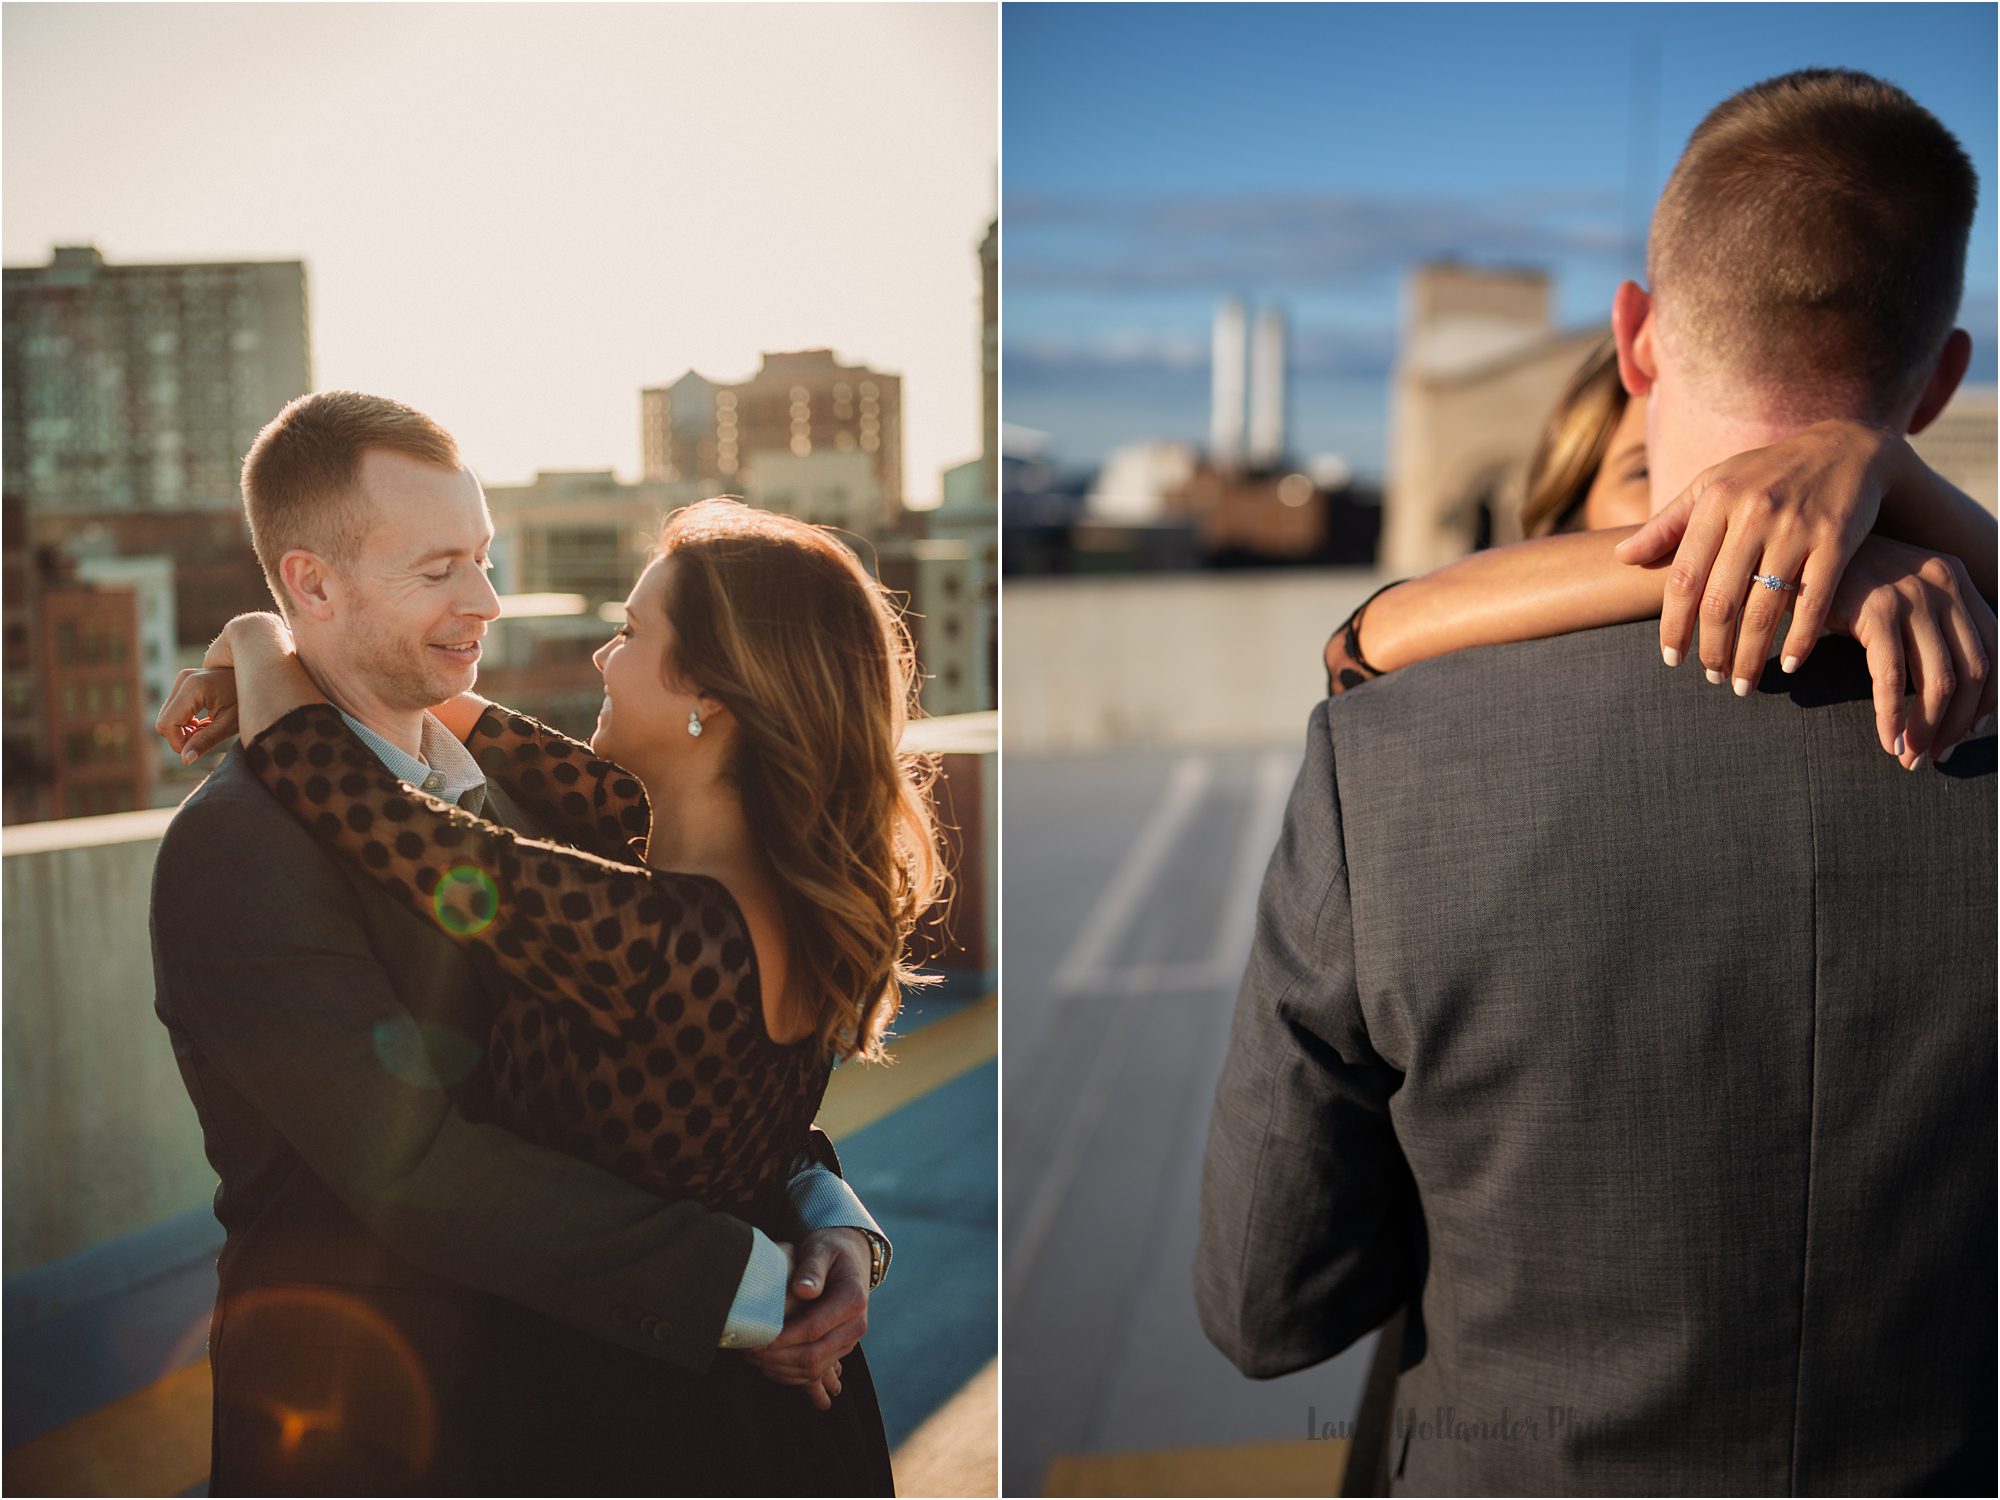 engagement session at The Z Lot in Downtown Detroit, MI. Urban engagement photos with Laura Hollander Photography, Detroit skyline 